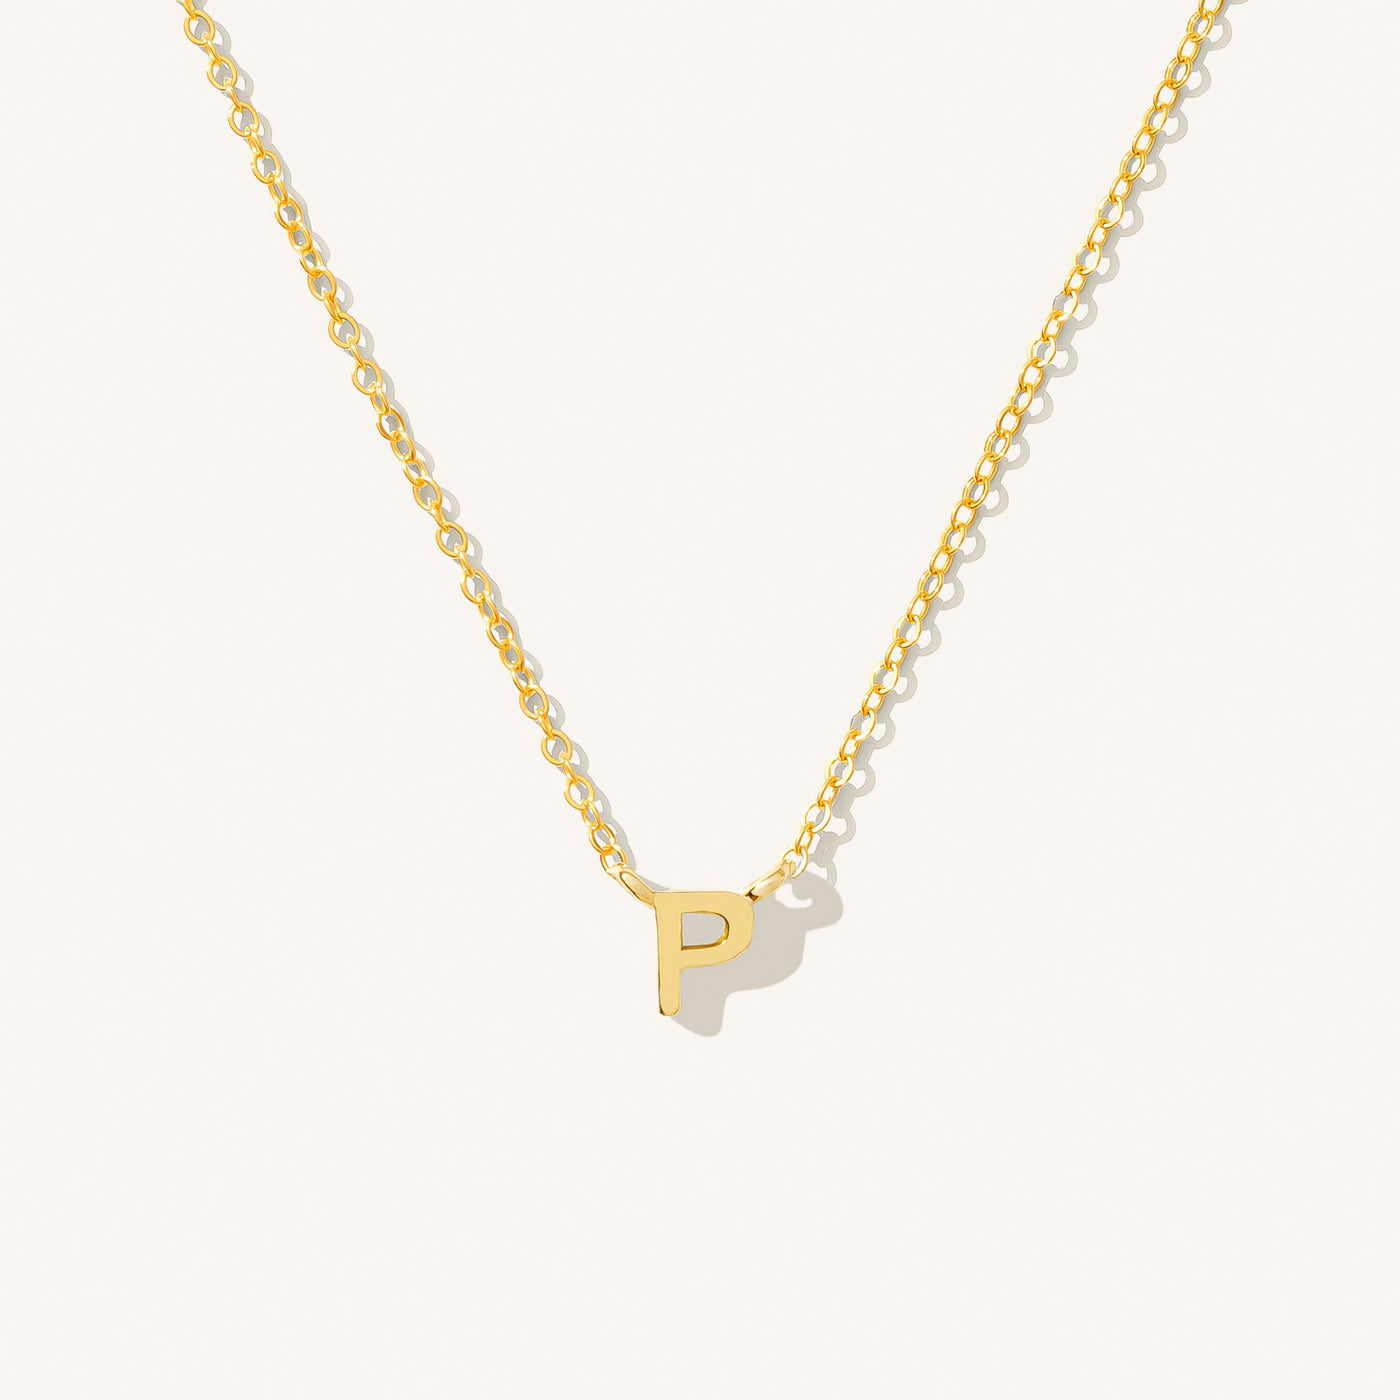 P Tiny Initial Necklace